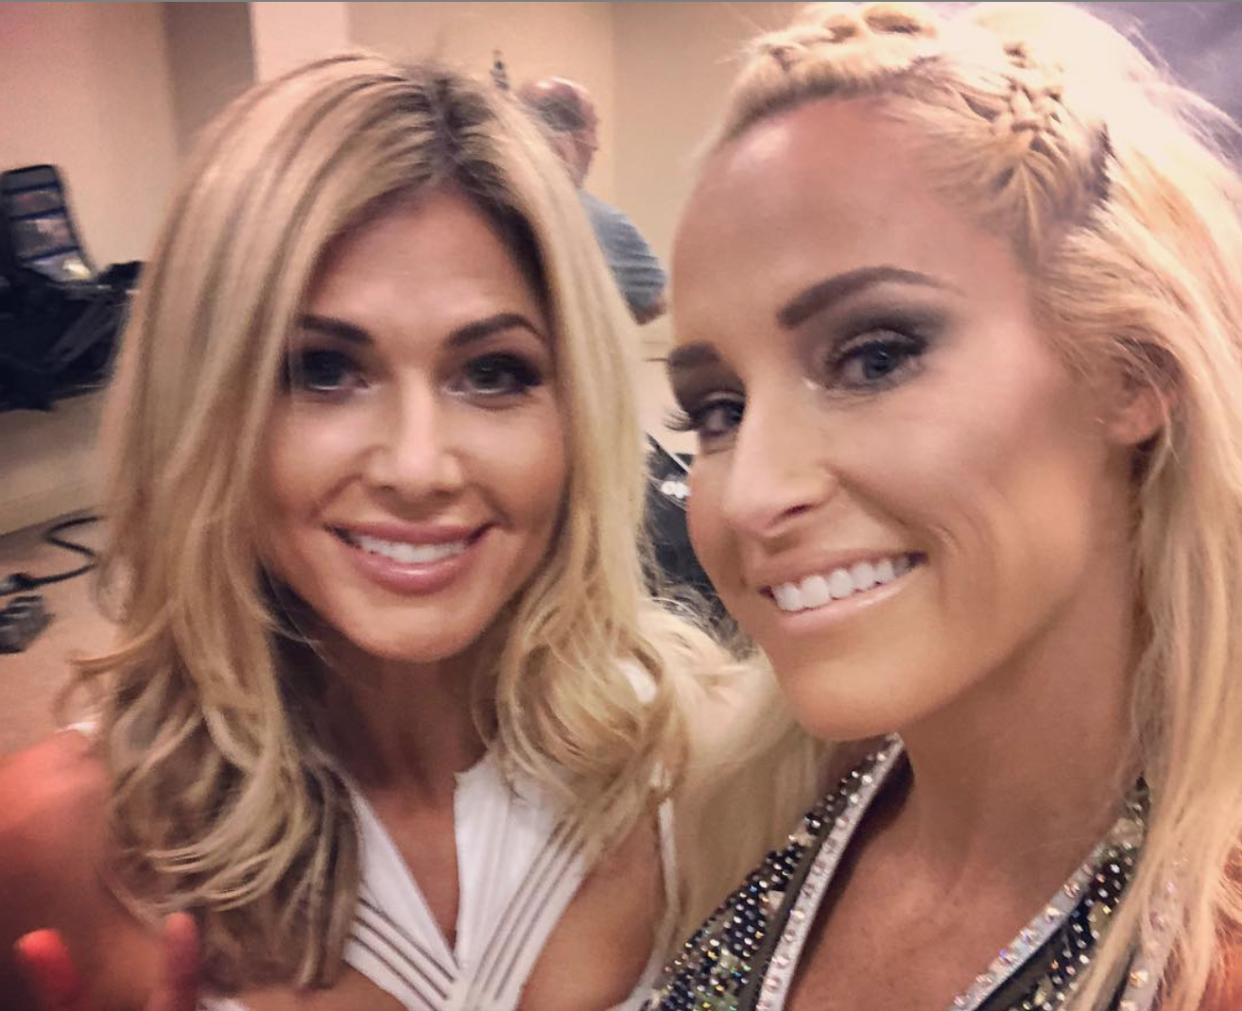 Former two-time WWE women’s champion Michelle McCool says women should get paid equal to men in main events. (Photo: Instagram, @mimicalacool)